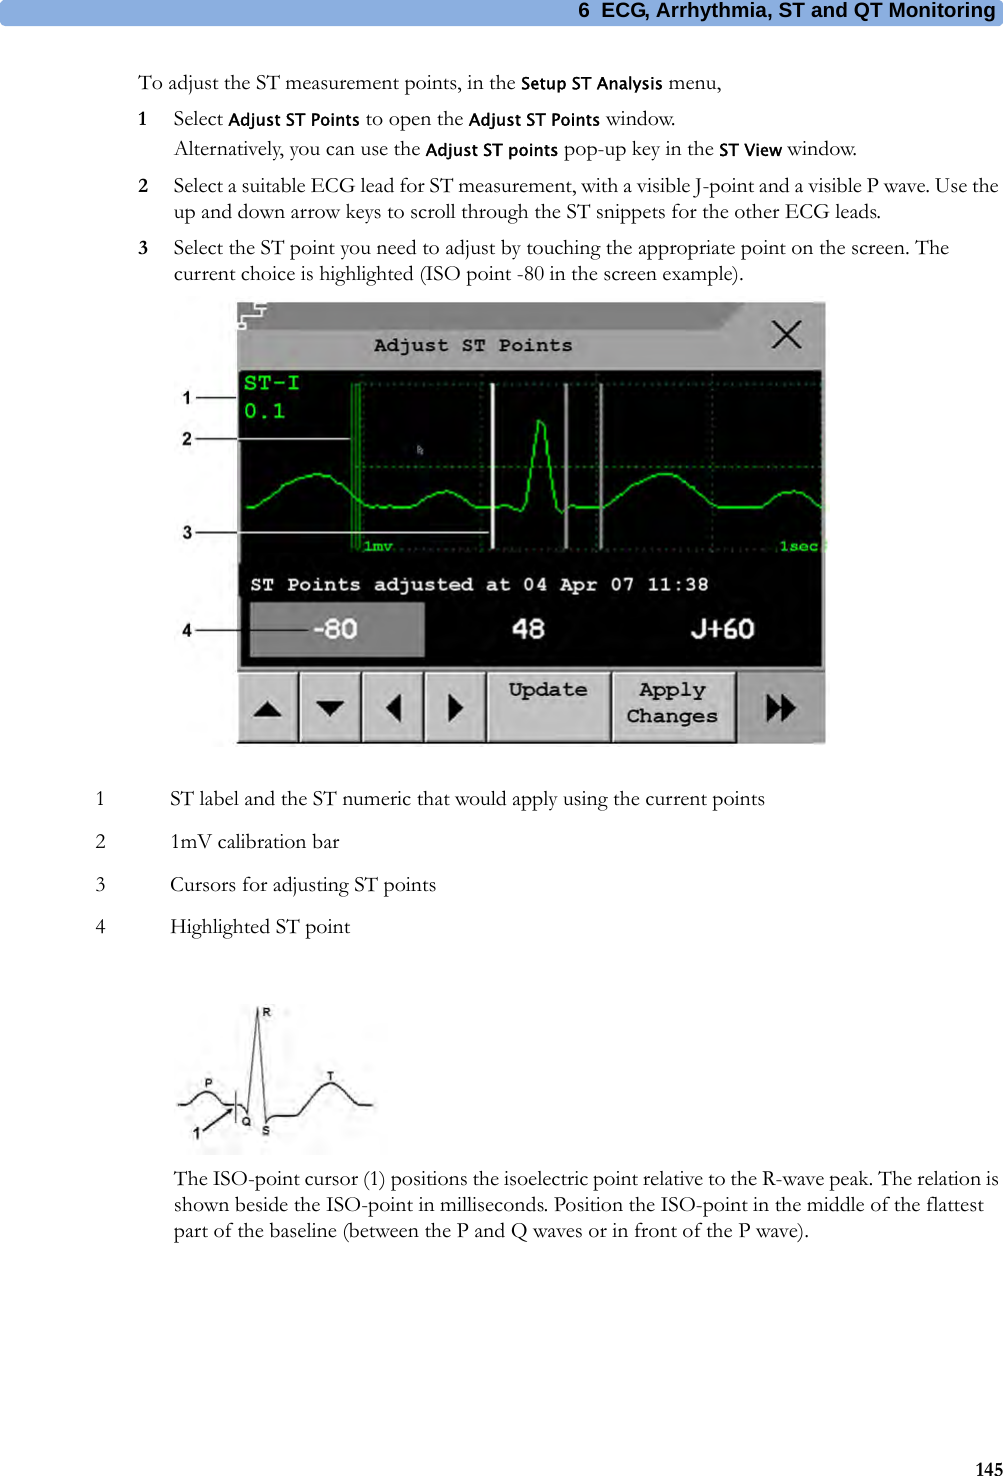 6 ECG, Arrhythmia, ST and QT Monitoring145To adjust the ST measurement points, in the Setup ST Analysis menu,1Select Adjust ST Points to open the Adjust ST Points window.Alternatively, you can use the Adjust ST points pop-up key in the ST View window.2Select a suitable ECG lead for ST measurement, with a visible J-point and a visible P wave. Use the up and down arrow keys to scroll through the ST snippets for the other ECG leads.3Select the ST point you need to adjust by touching the appropriate point on the screen. The current choice is highlighted (ISO point -80 in the screen example).The ISO-point cursor (1) positions the isoelectric point relative to the R-wave peak. The relation is shown beside the ISO-point in milliseconds. Position the ISO-point in the middle of the flattest part of the baseline (between the P and Q waves or in front of the P wave).1 ST label and the ST numeric that would apply using the current points2 1mV calibration bar3 Cursors for adjusting ST points4 Highlighted ST point